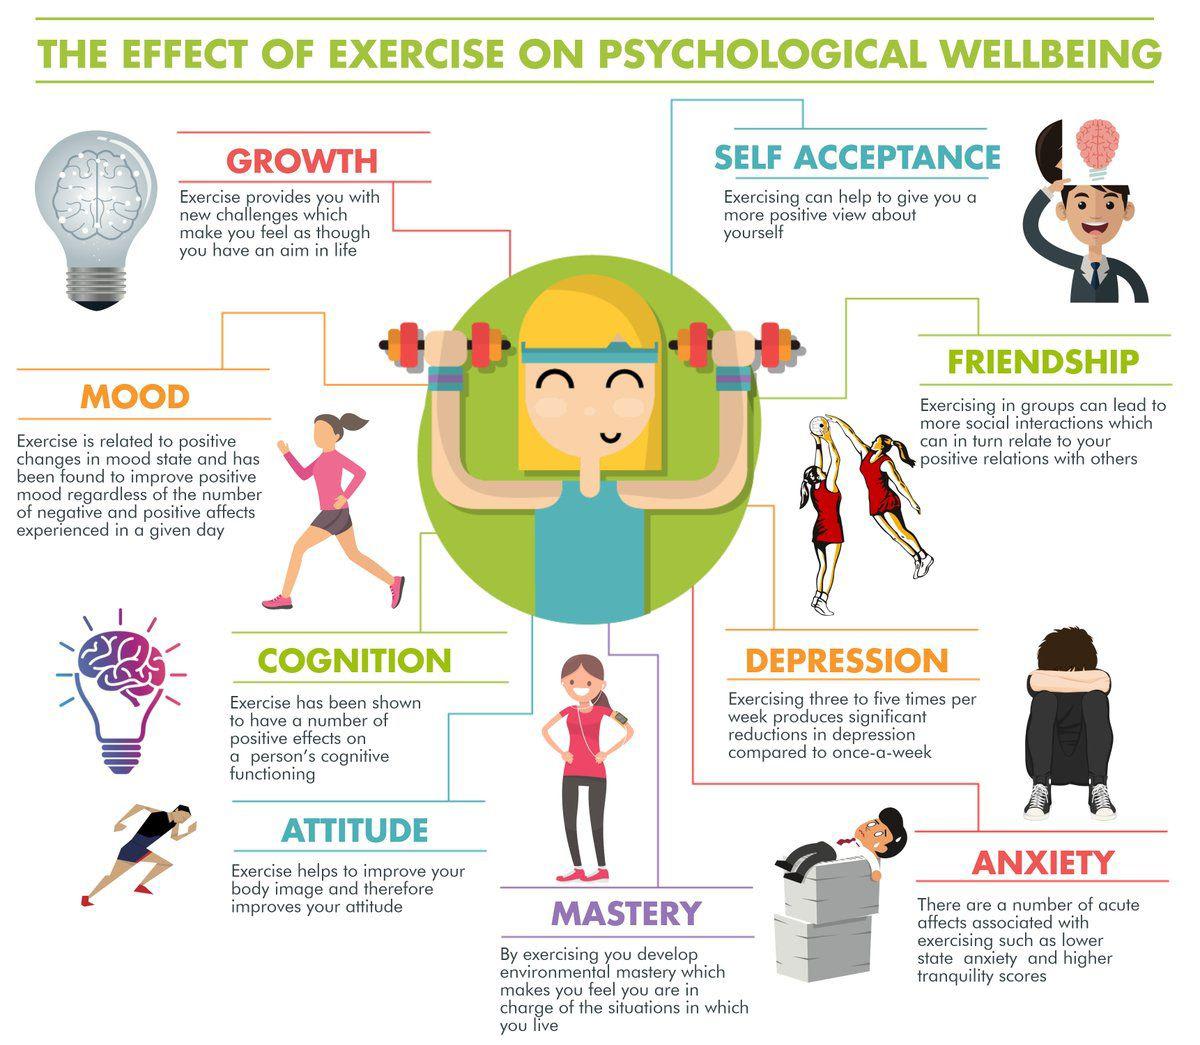 The Effects of Exercise on Psychological Well-Being